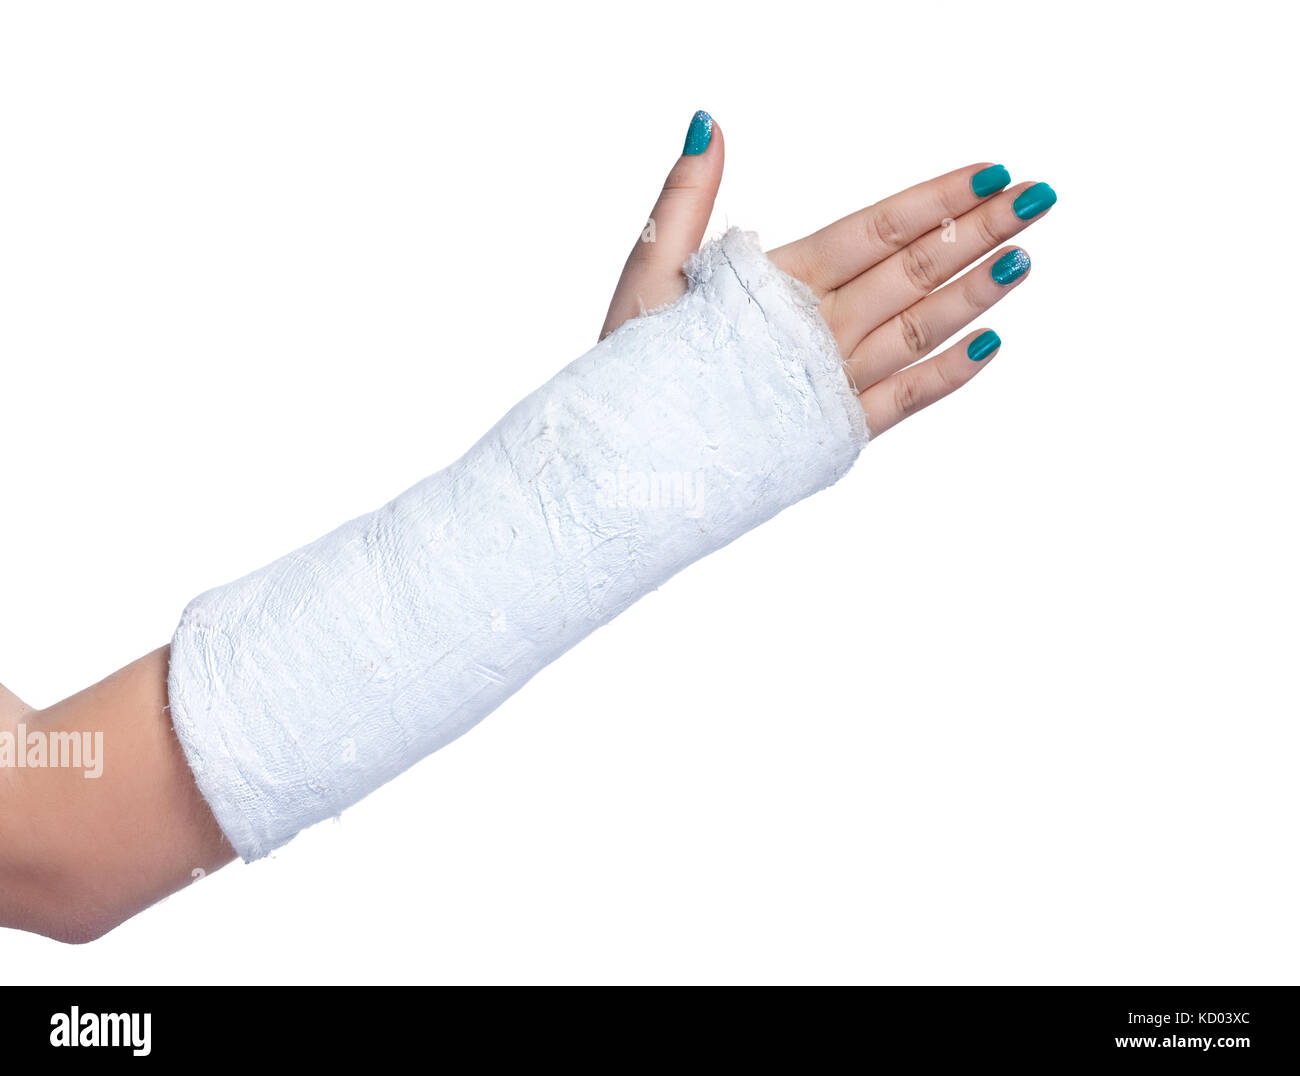 Hand in Cast on White Background Stock Photo - Image of closeup